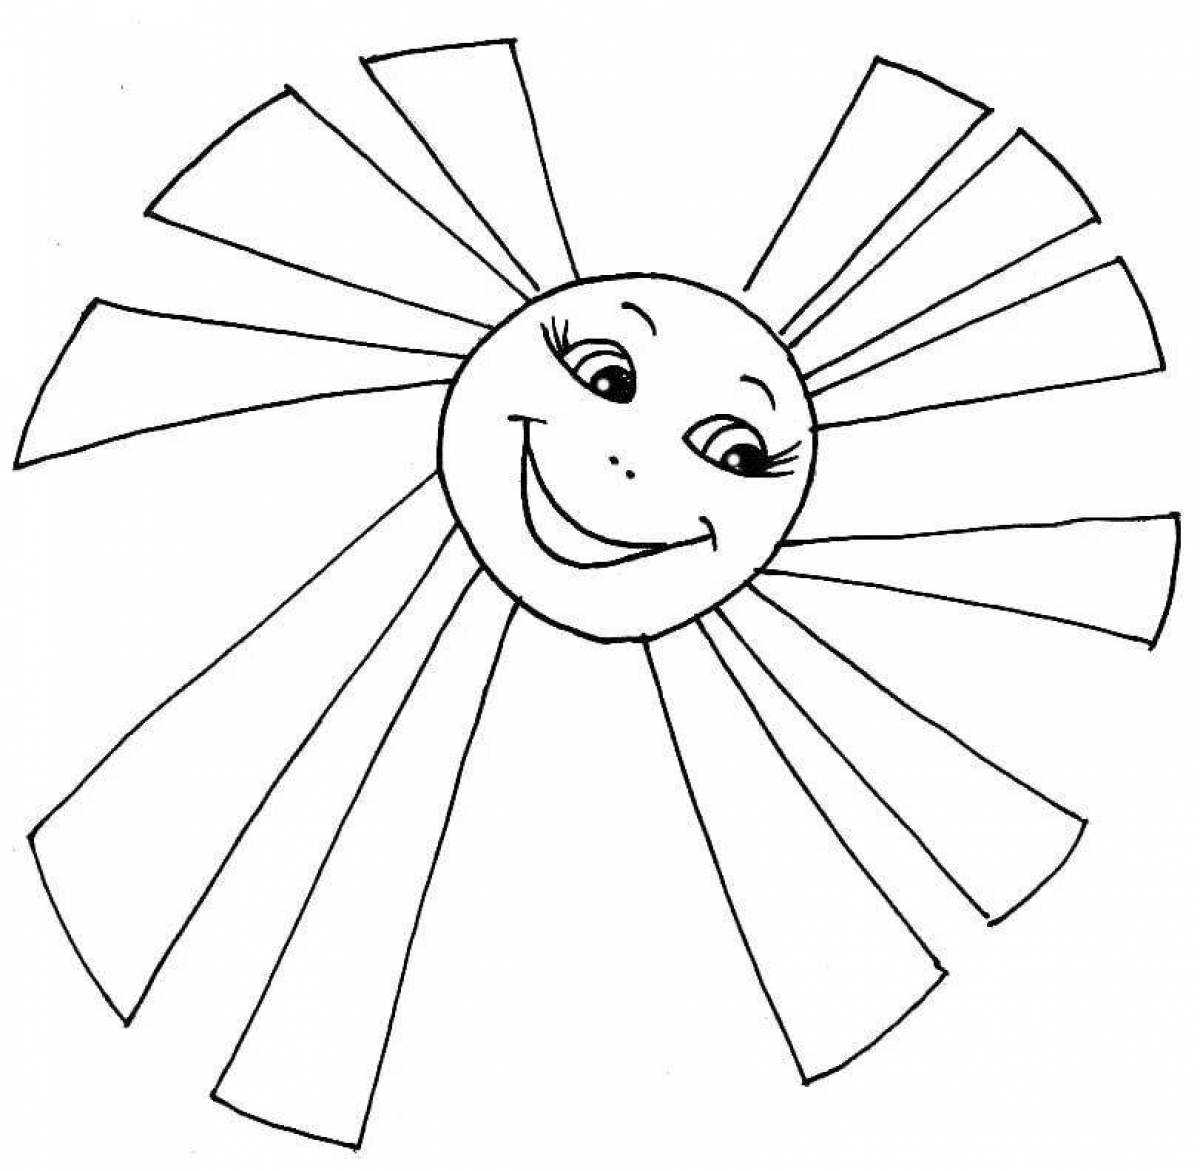 Shiny coloring page drawing of the sun